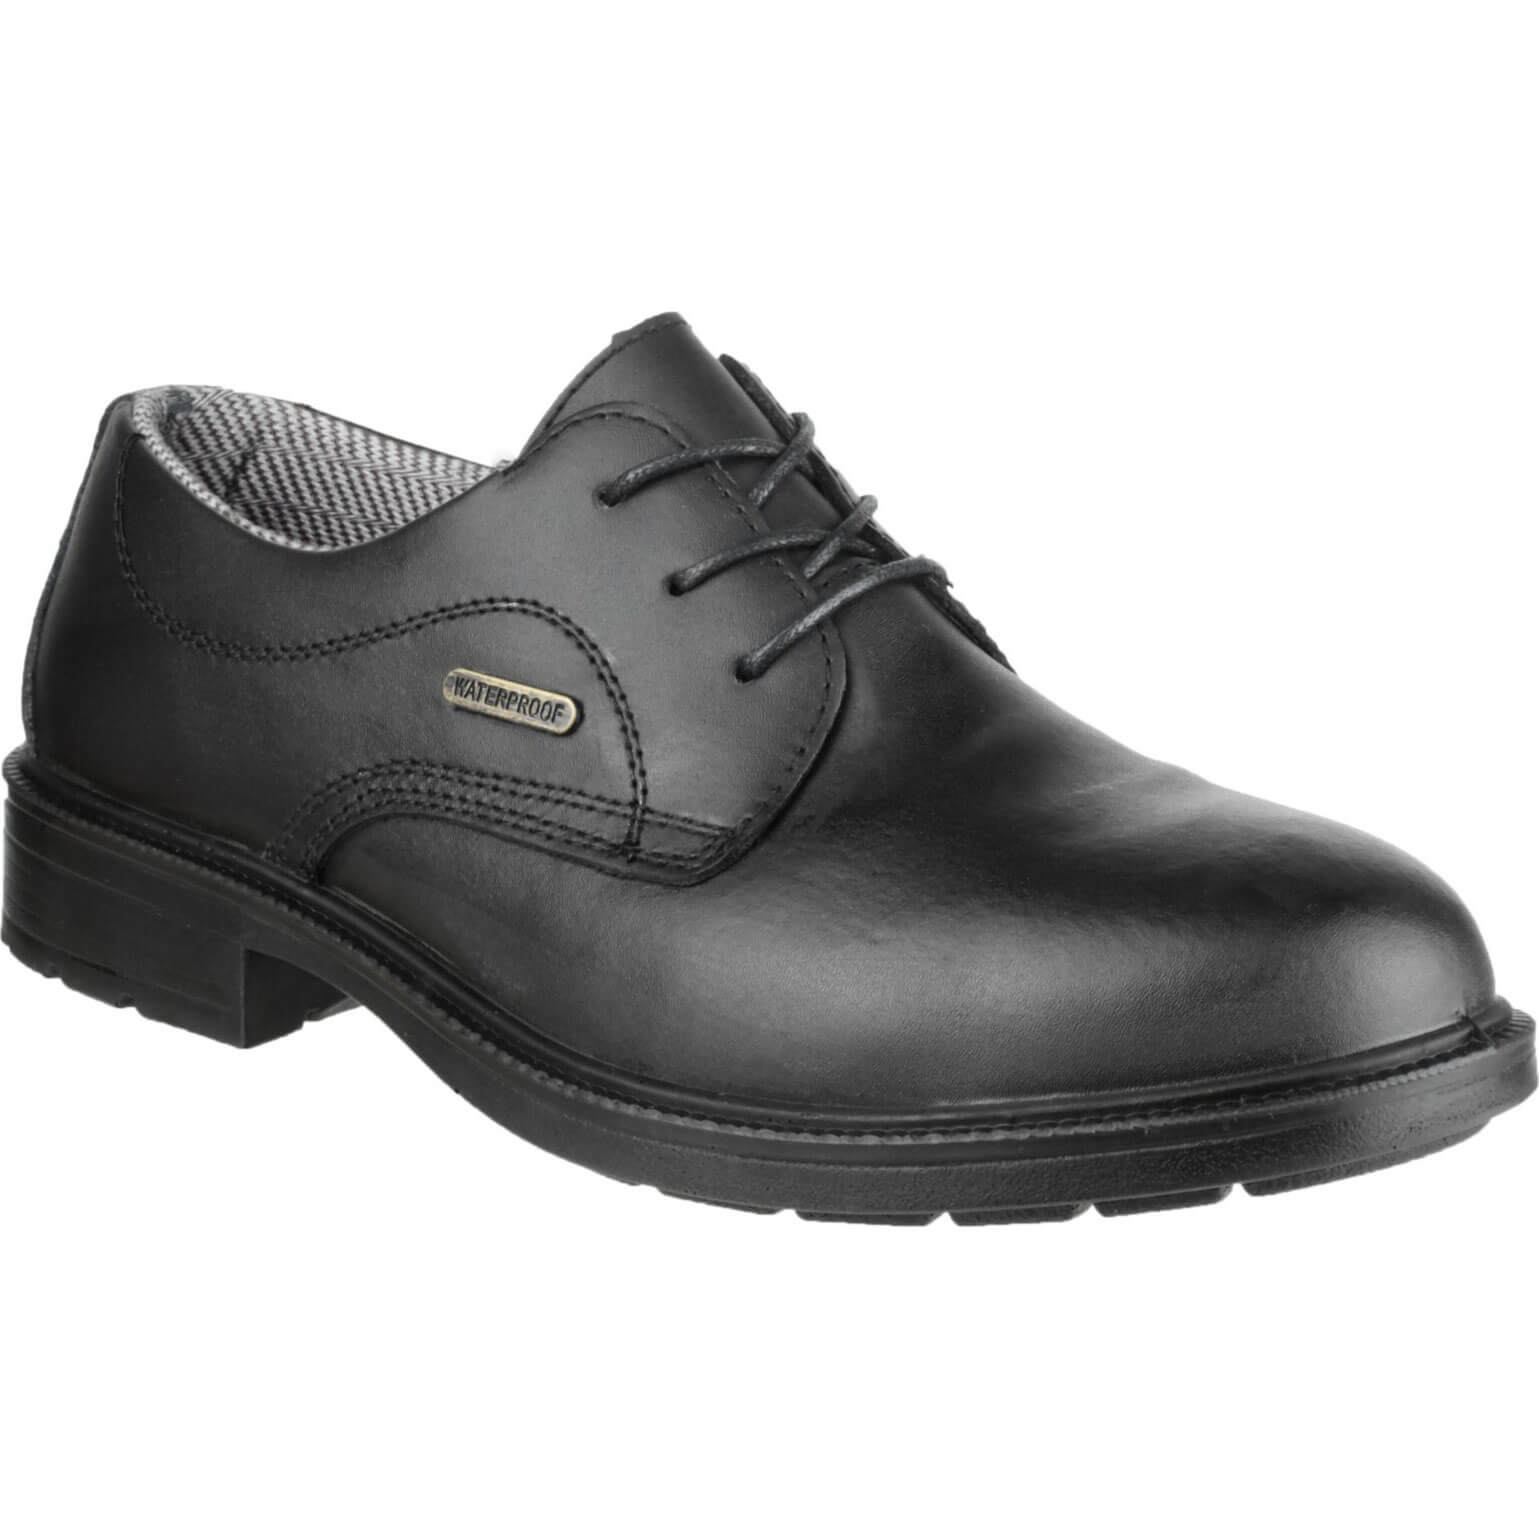 Image of Amblers Safety FS62 Waterproof Lace Up Gibson Safety Shoe Black Size 14